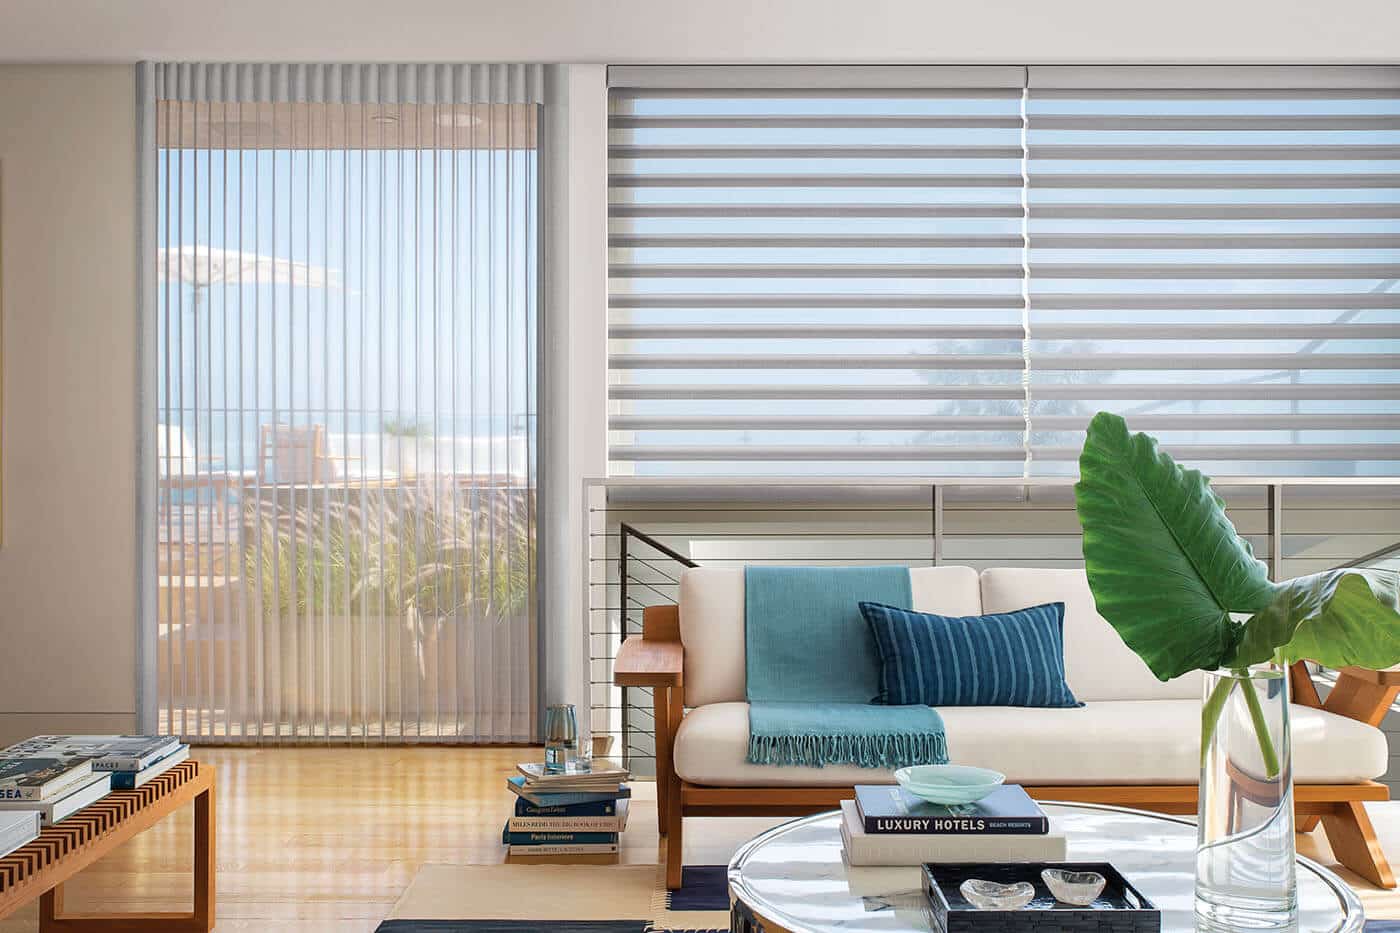 Translucent Luxaflex Pirouette Shades in a vibrant home living room, vaguely showing scenic view of the oceanic outdoors through large windows.